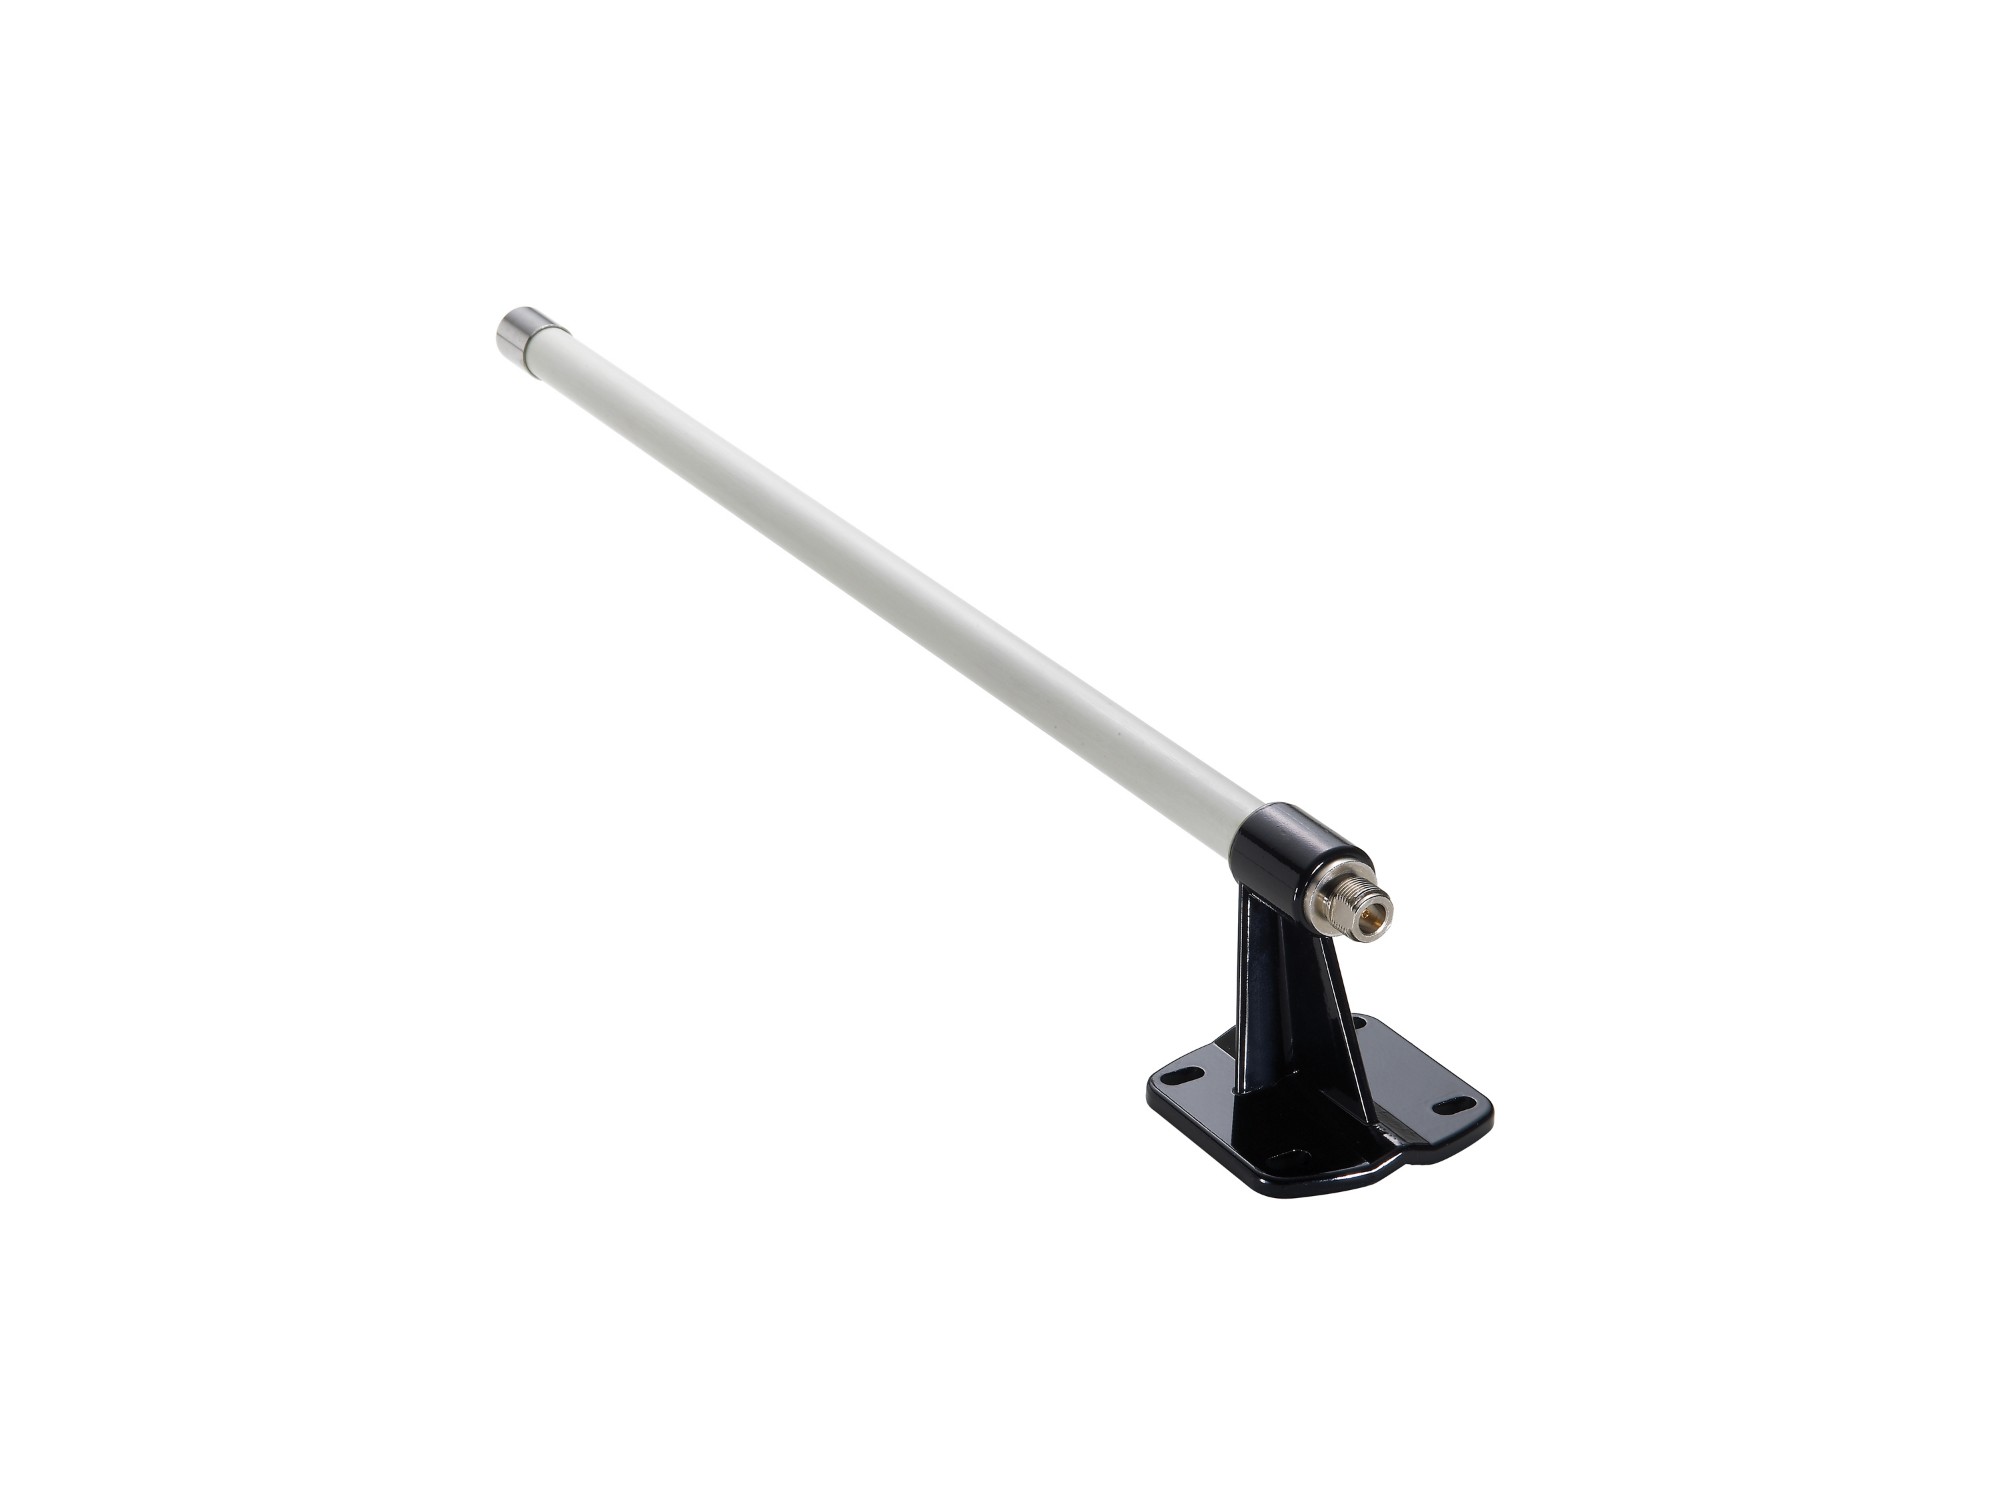 Photos - Antenna for Router LevelOne 9dBi 2.4GHz Omni-directional Outdoor Antenna OAN-2090 